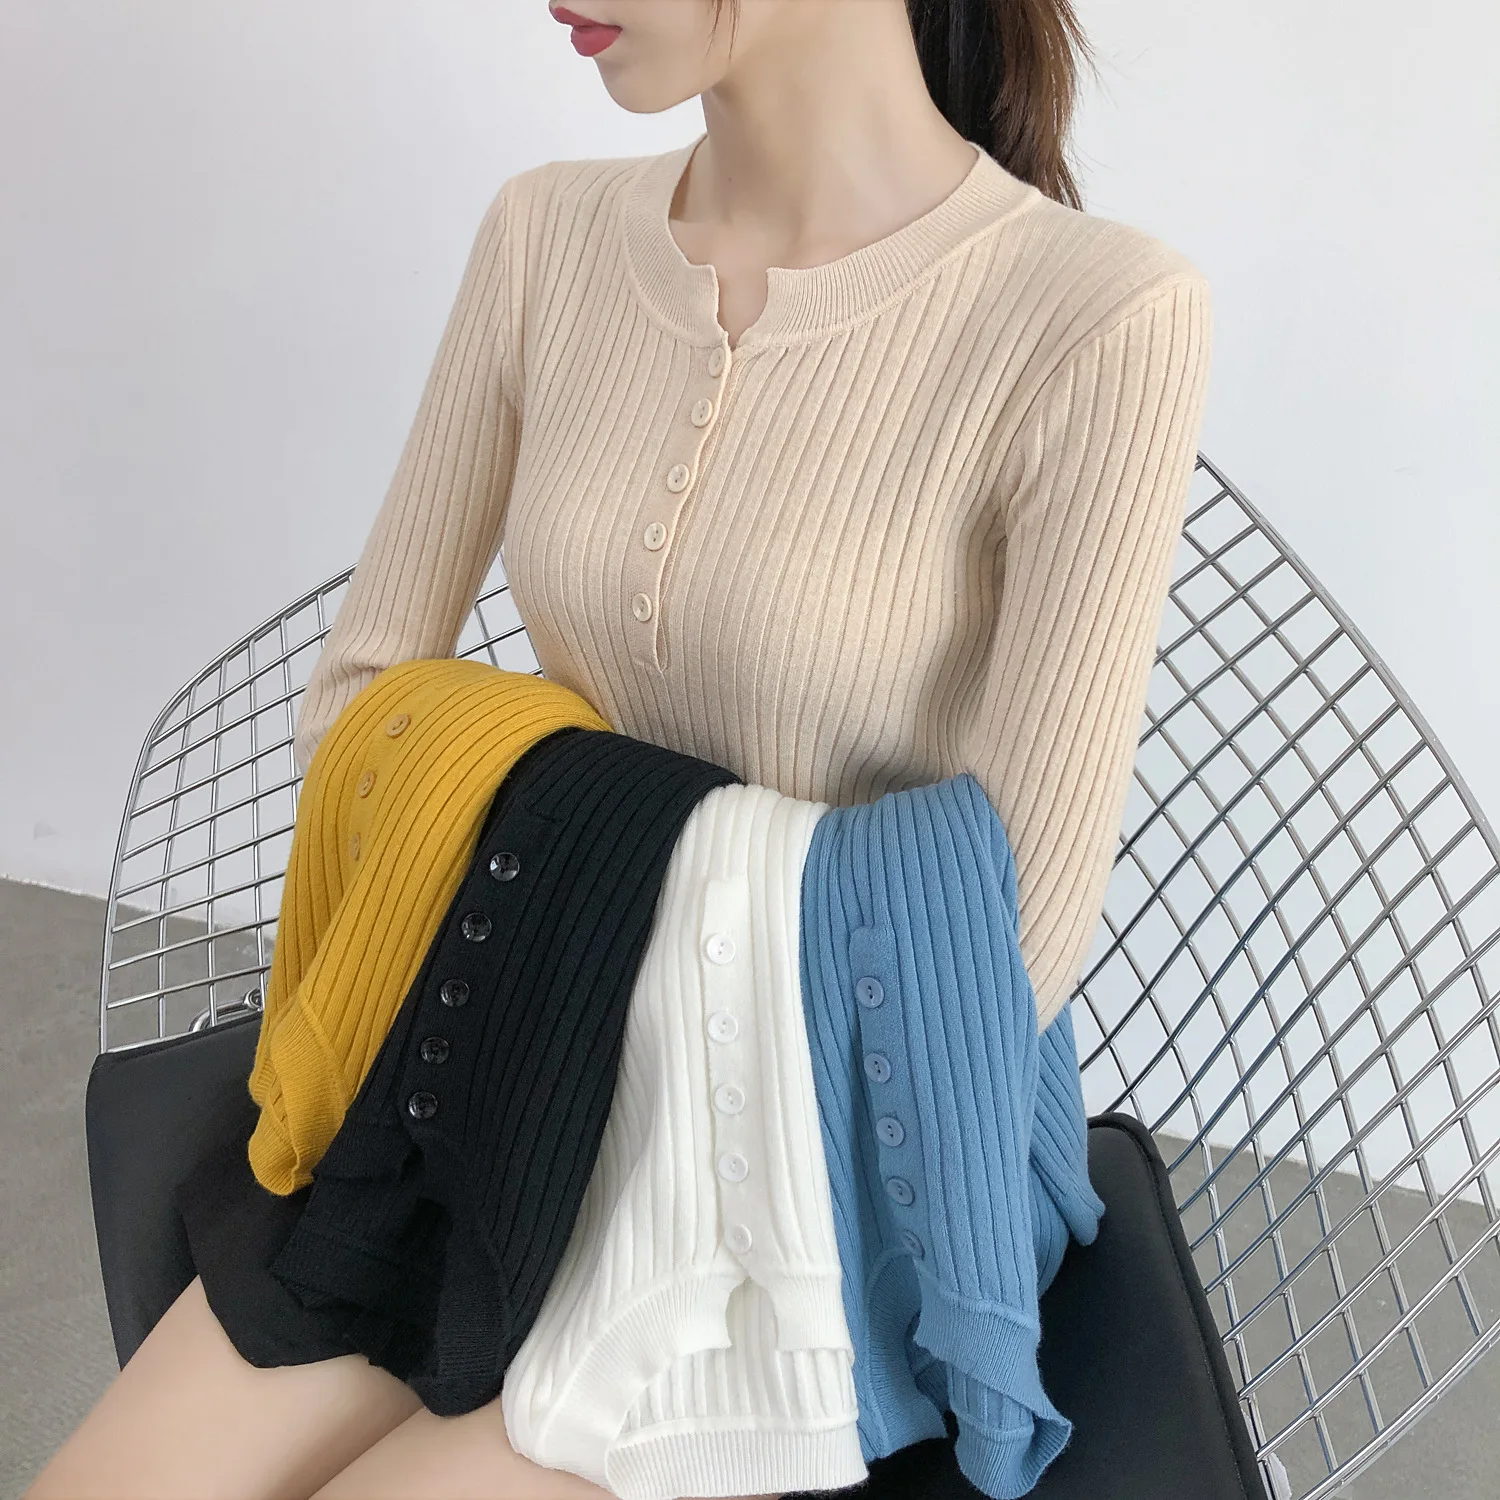 

Autumn Winter Design Sense O Neck Leaky Clavicle Knitted Bottoming Shirt Women's Slim Short Pit Strip Thin Wweater Button Top